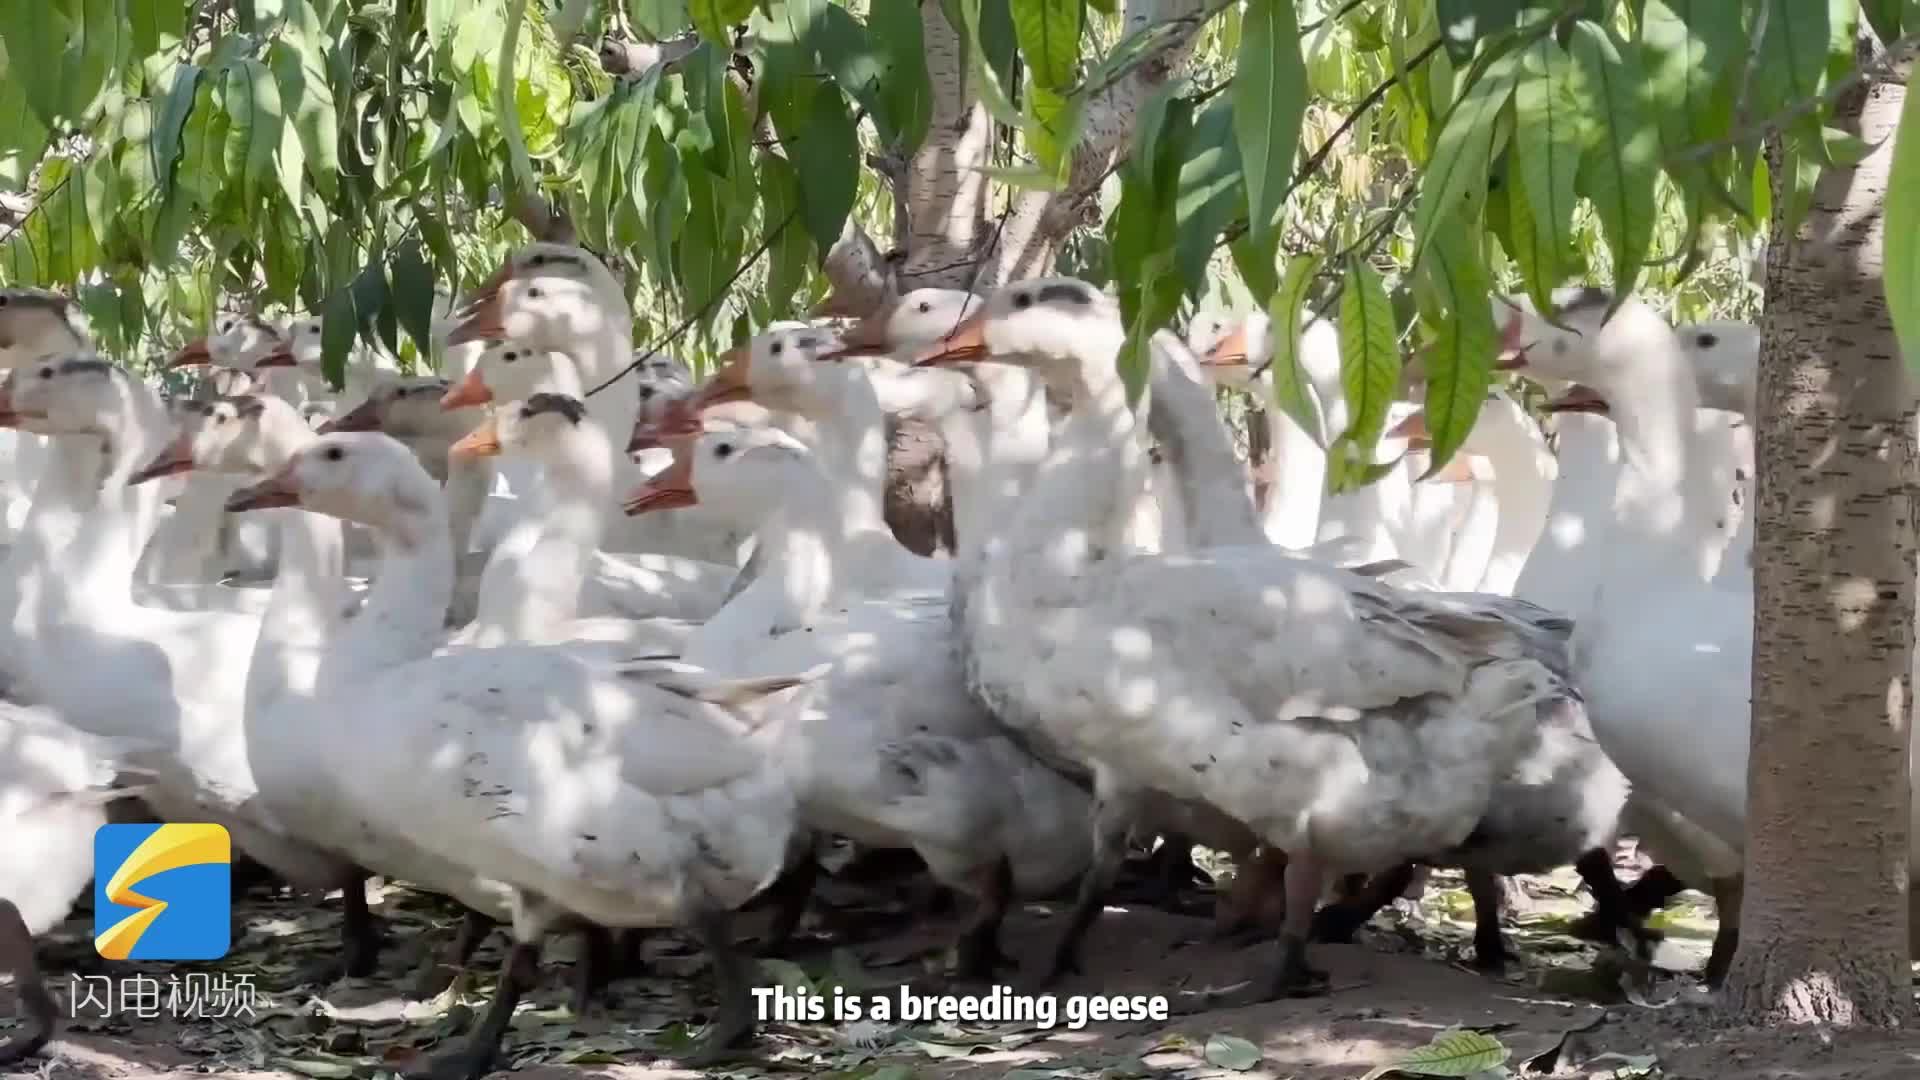 Explore Shandong: Coexistence of geese and peaches